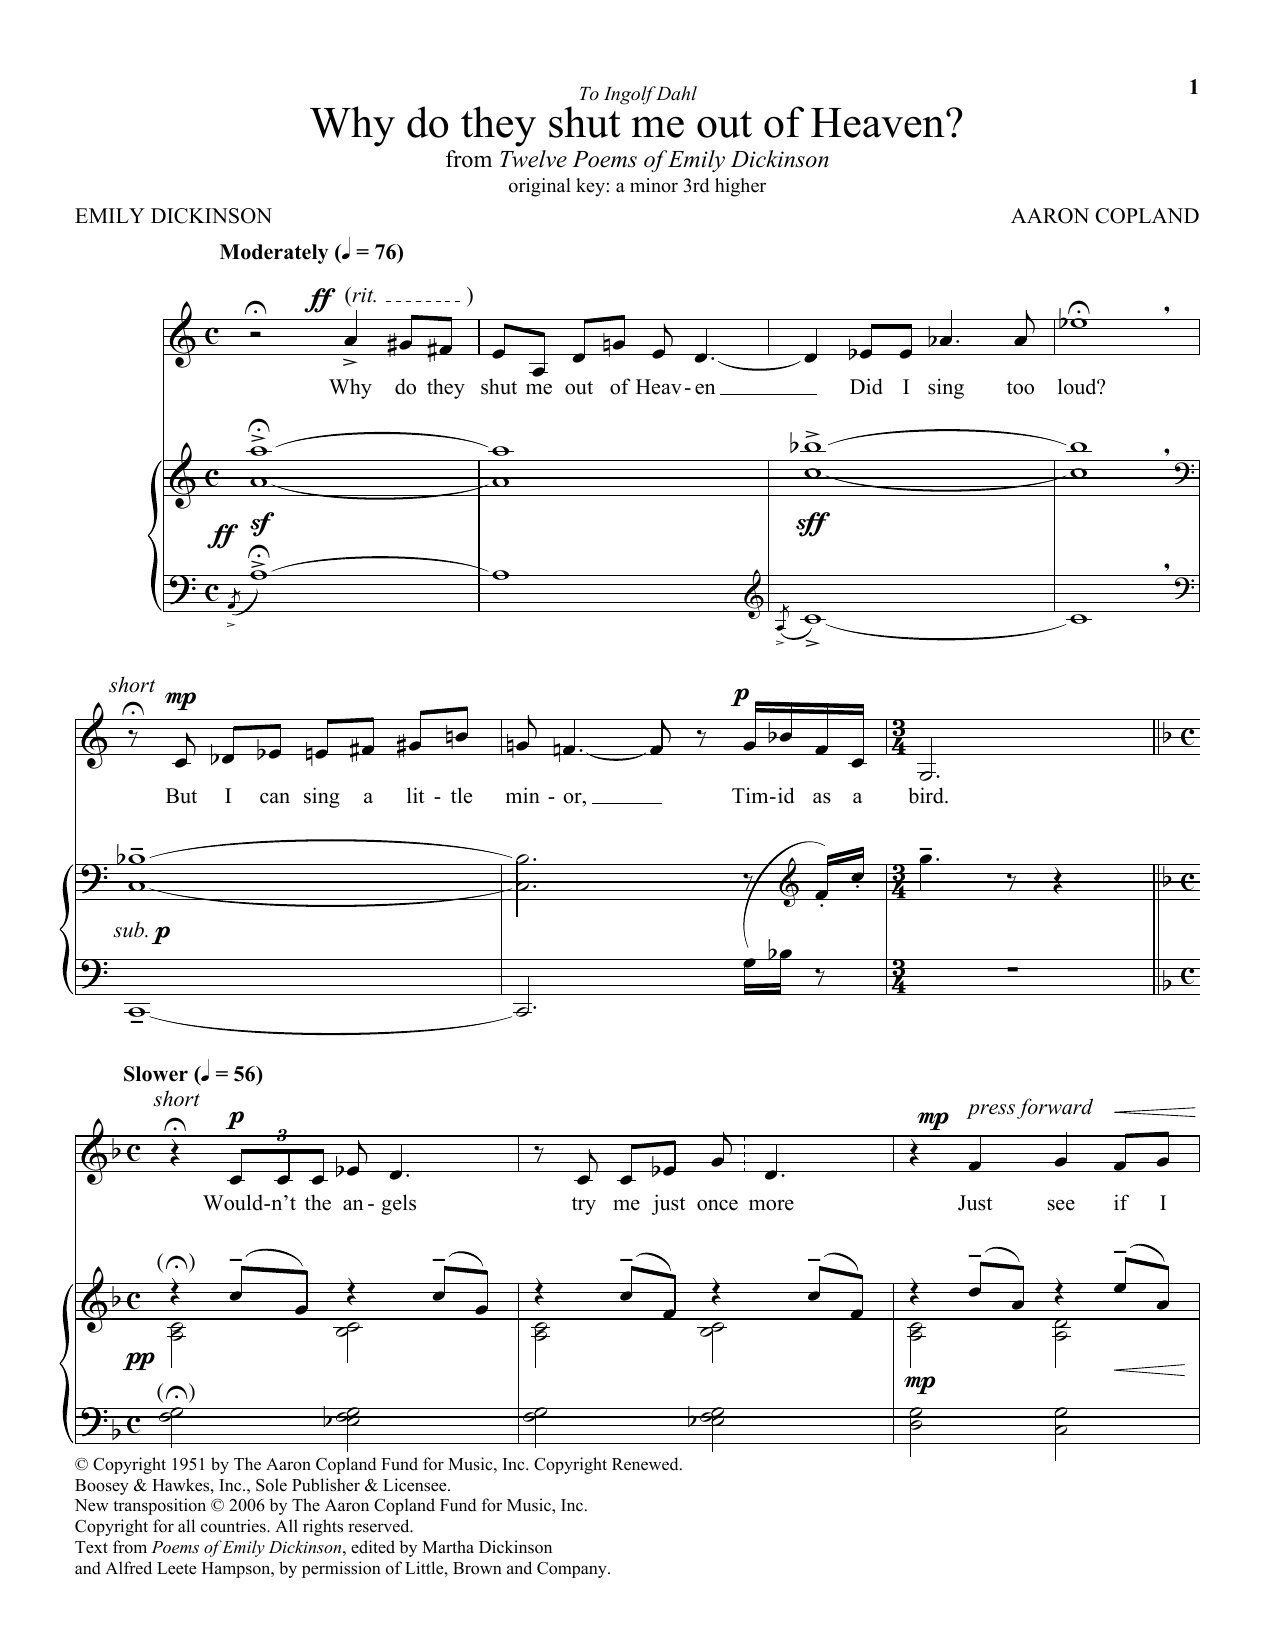 Aaron Copland Why Do They Shut Me Out Of Heaven? sheet music notes and chords. Download Printable PDF.